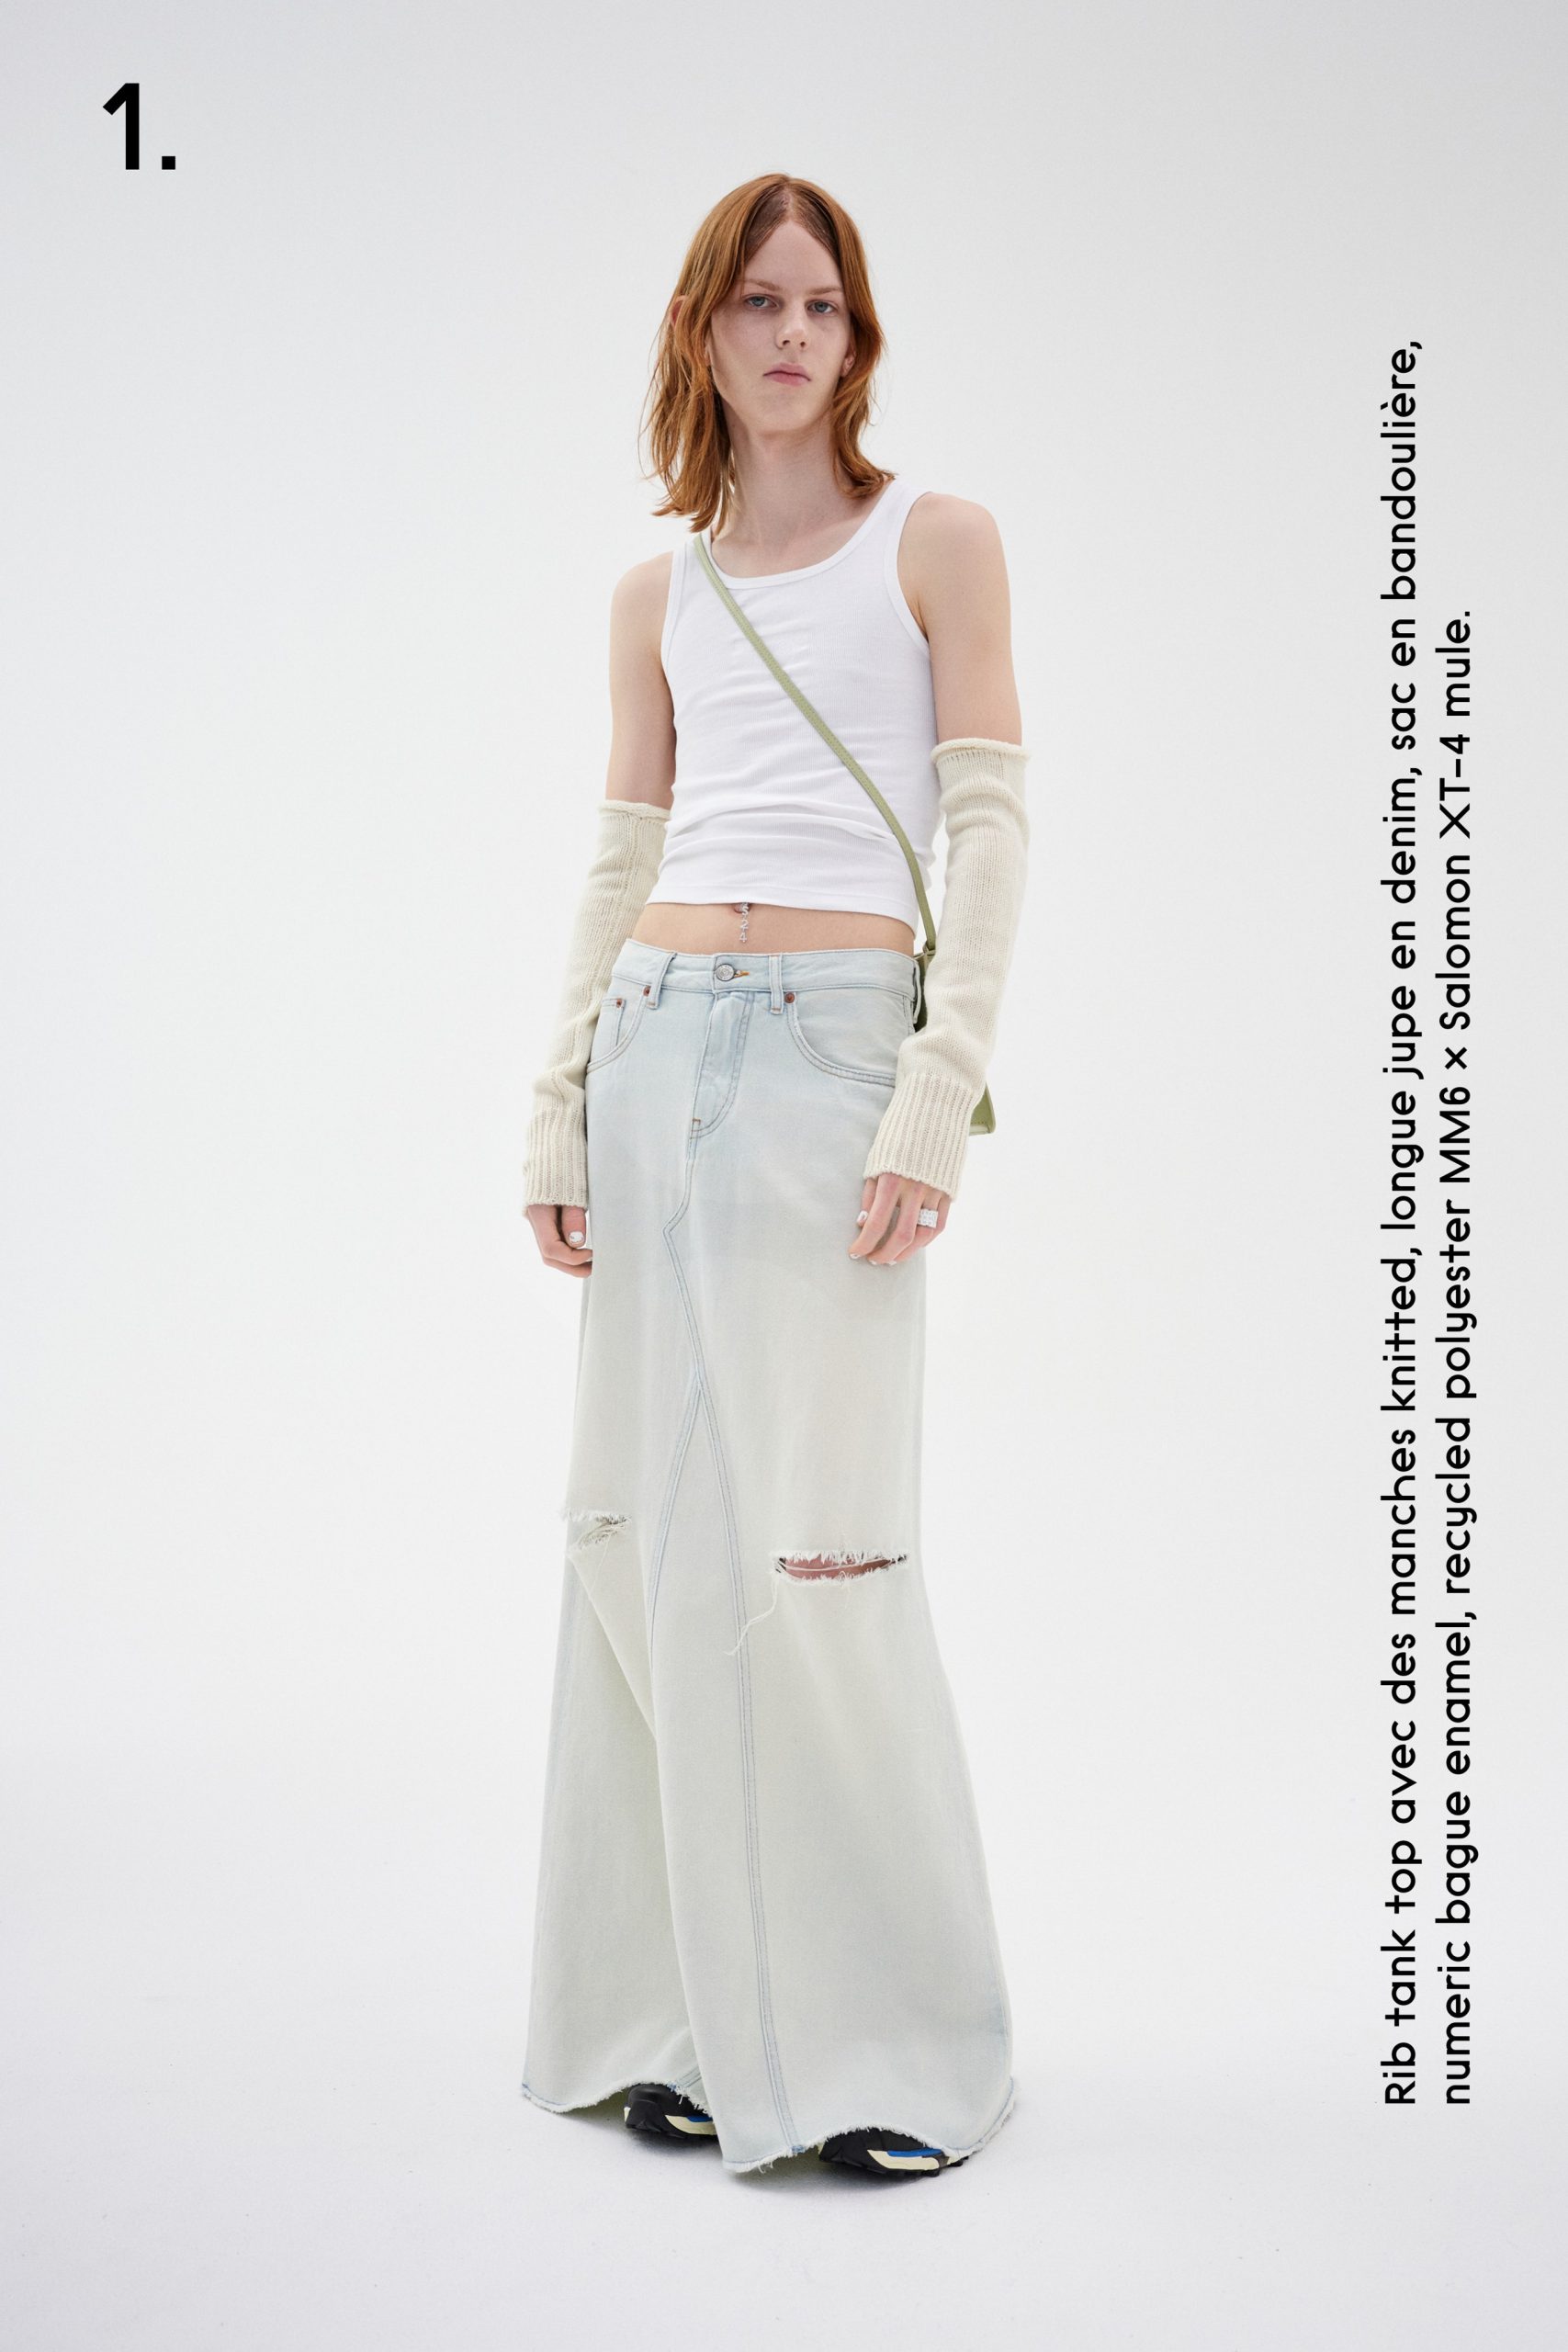 MM6 Maison Margiela Resort 2024 Over View Your Daily News Source